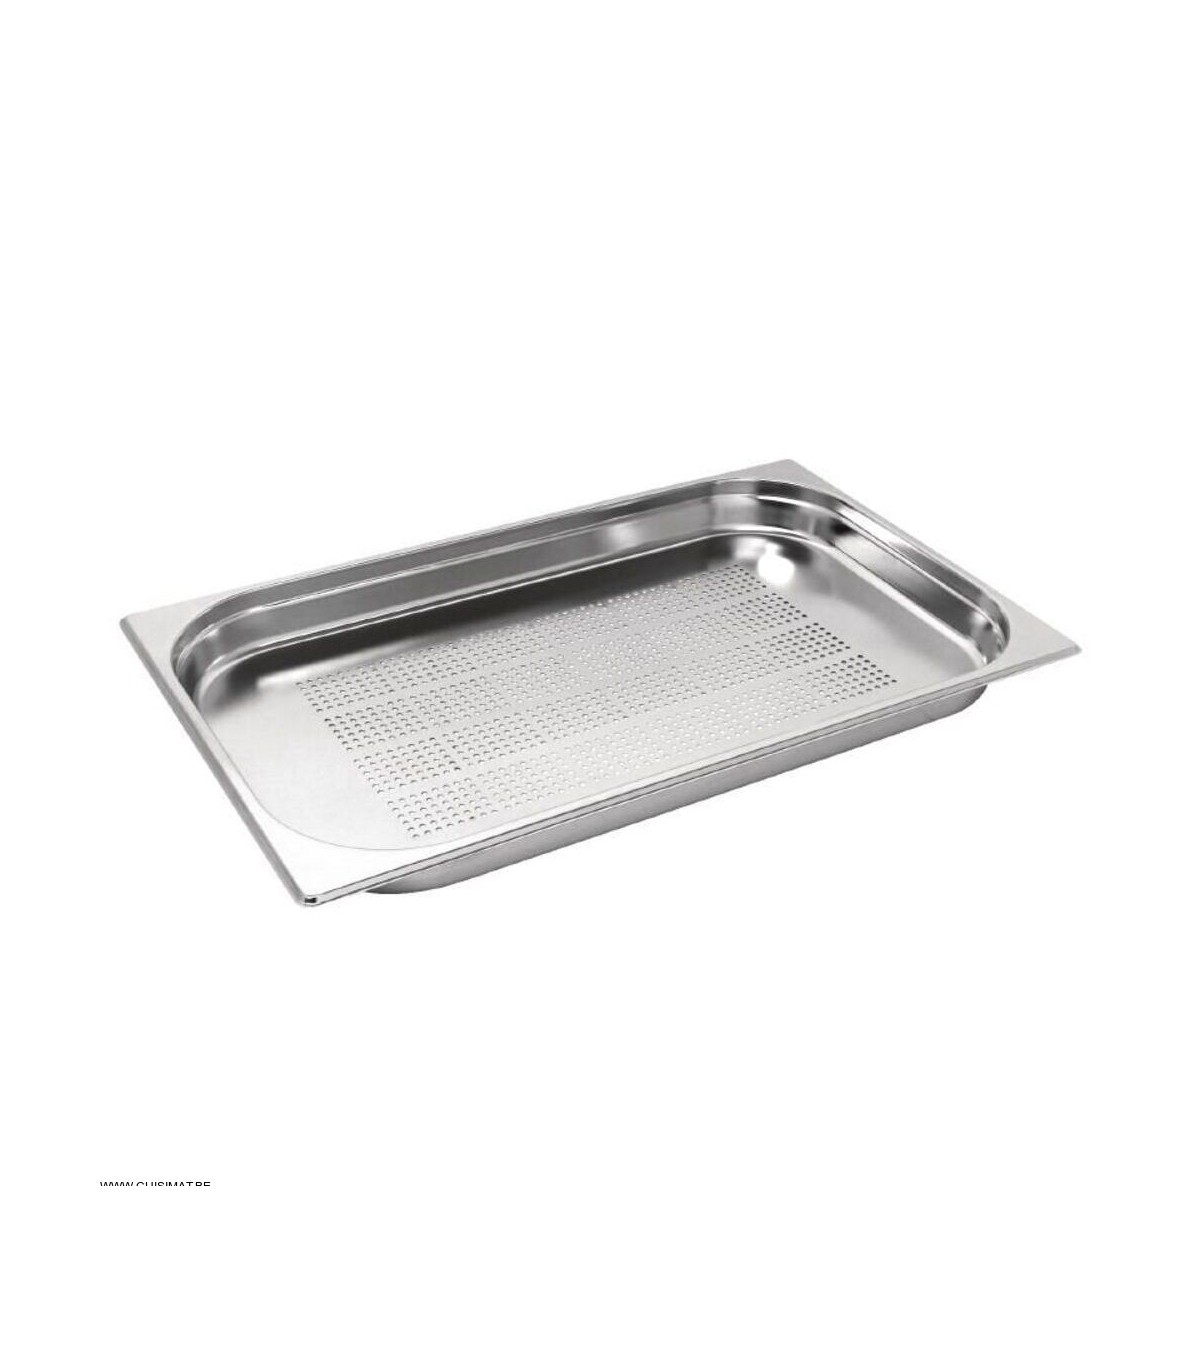 GN 1/1 PERFORE (325 * 530MM) 20 MM  VOGUE dans BACS GASTRONORM ANTI-ADHESIF